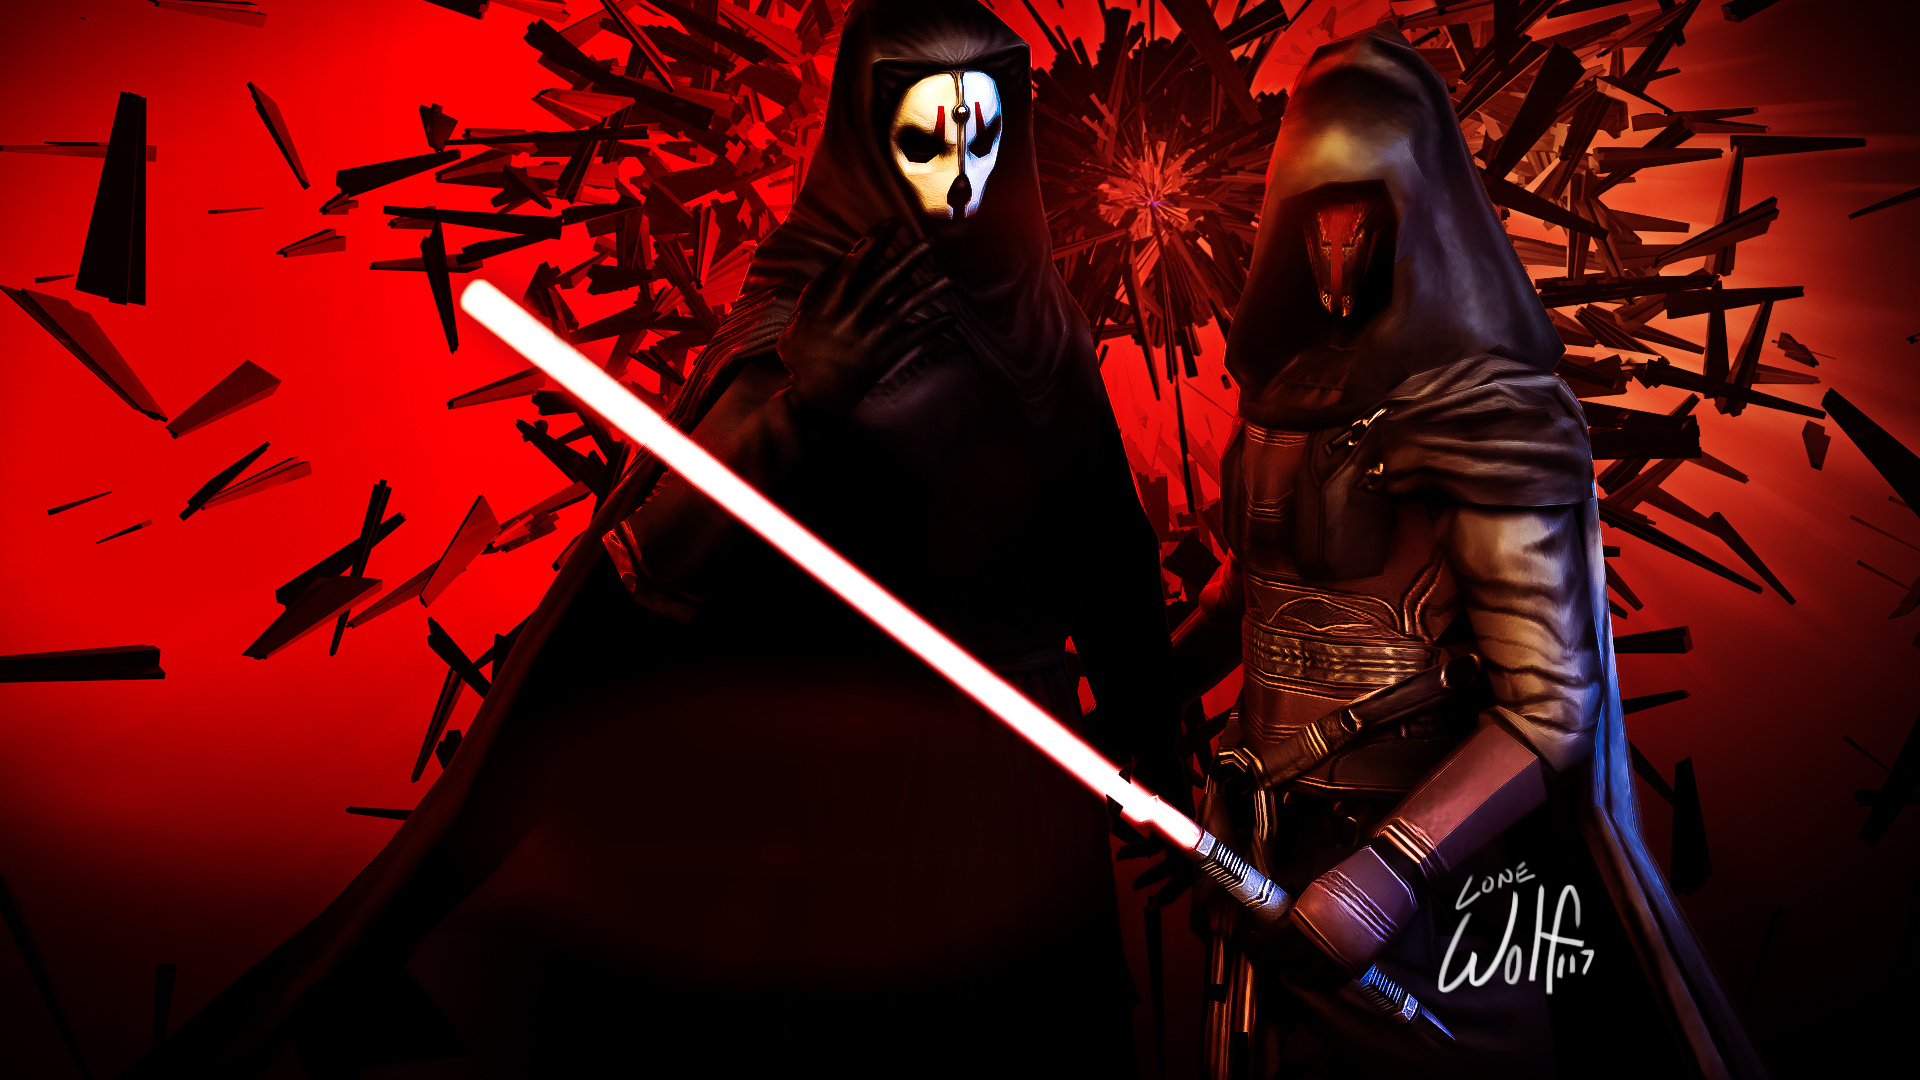 Sith Wallpapers.